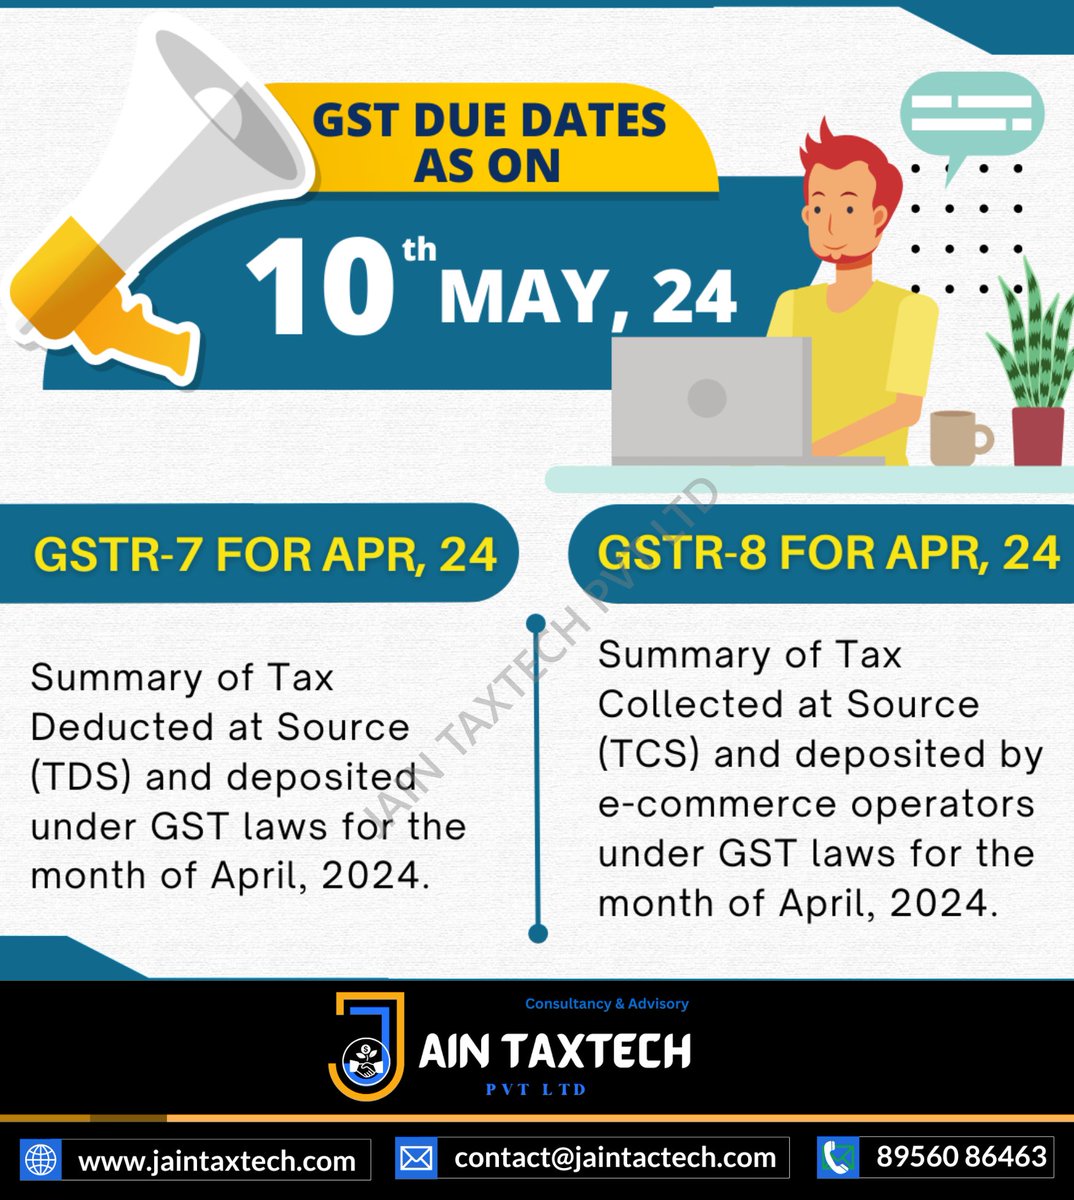 Attention Tax Deductors! 📢 File your GSTR-7 for April 2024, summarizing TDS deposited under GST laws. Stay compliant with Jain TaxTech! 💼💳 #GSTR7 #TaxCompliance #JainTaxTech #stockmarketcrash  #Auditing #BusinessTax